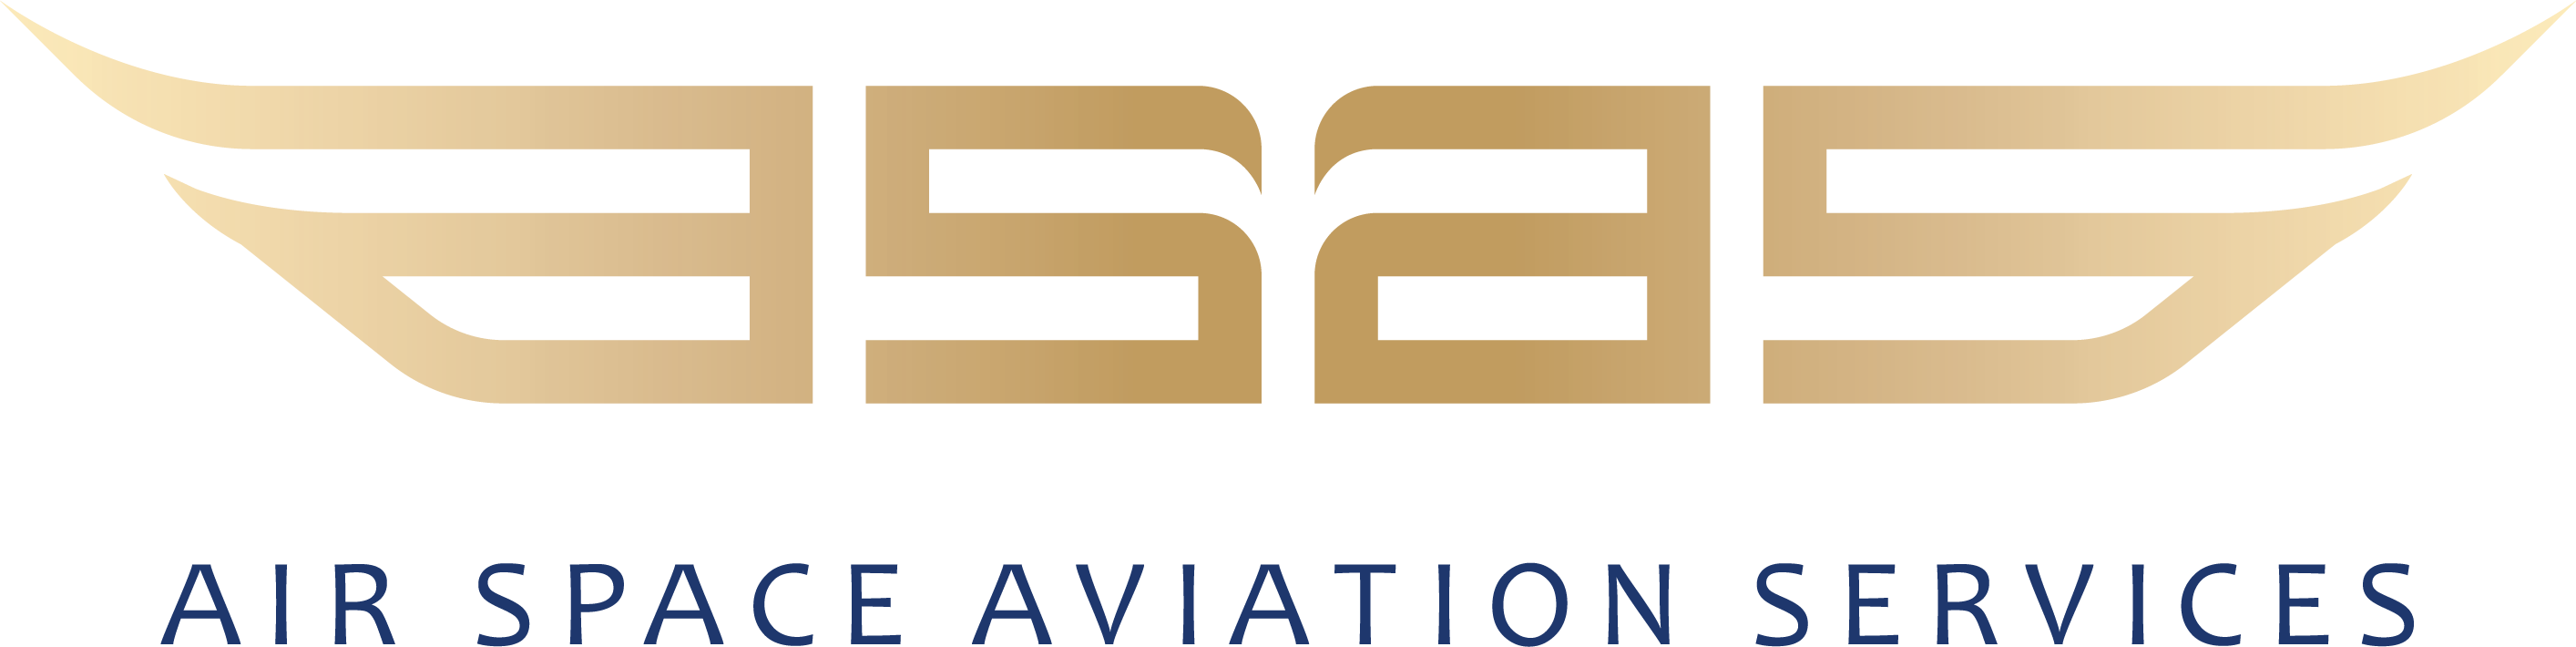 AIR SPACE Aviation Services